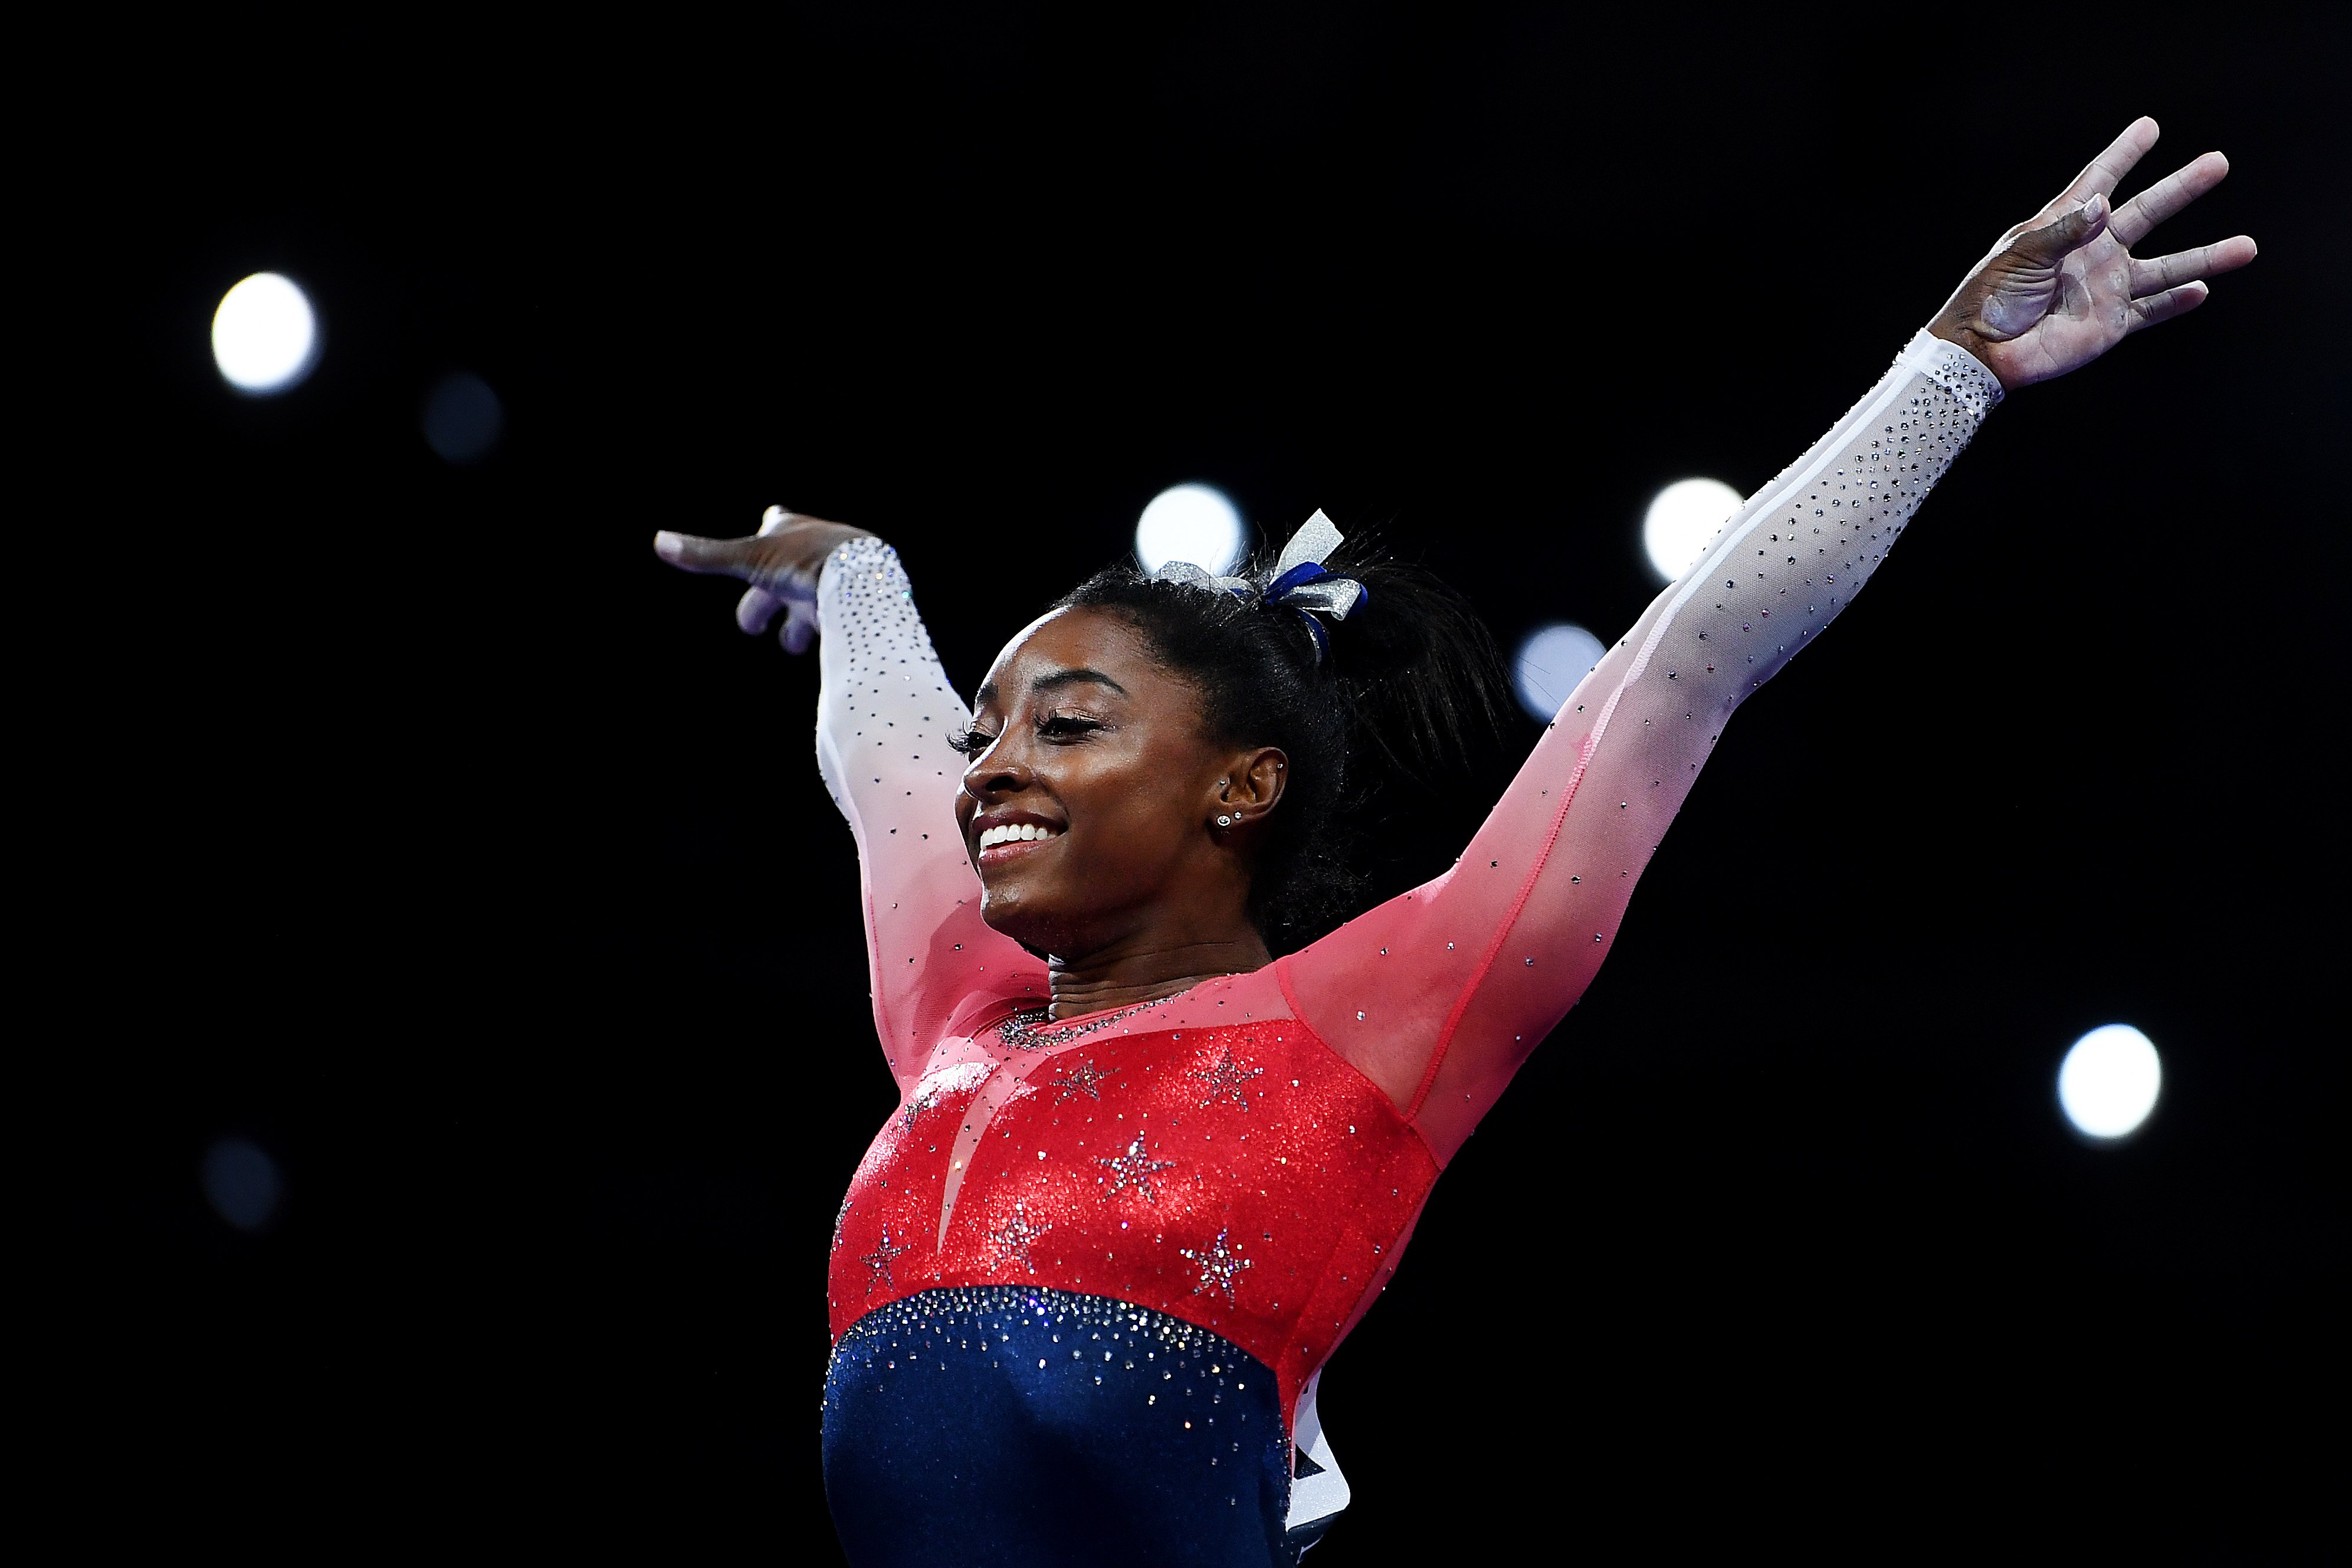 Simone Biles at  the FIG Artistic Gymnastics World Championships on October 08, 2019 in Stuttgart, Germany.| Source: Getty Images